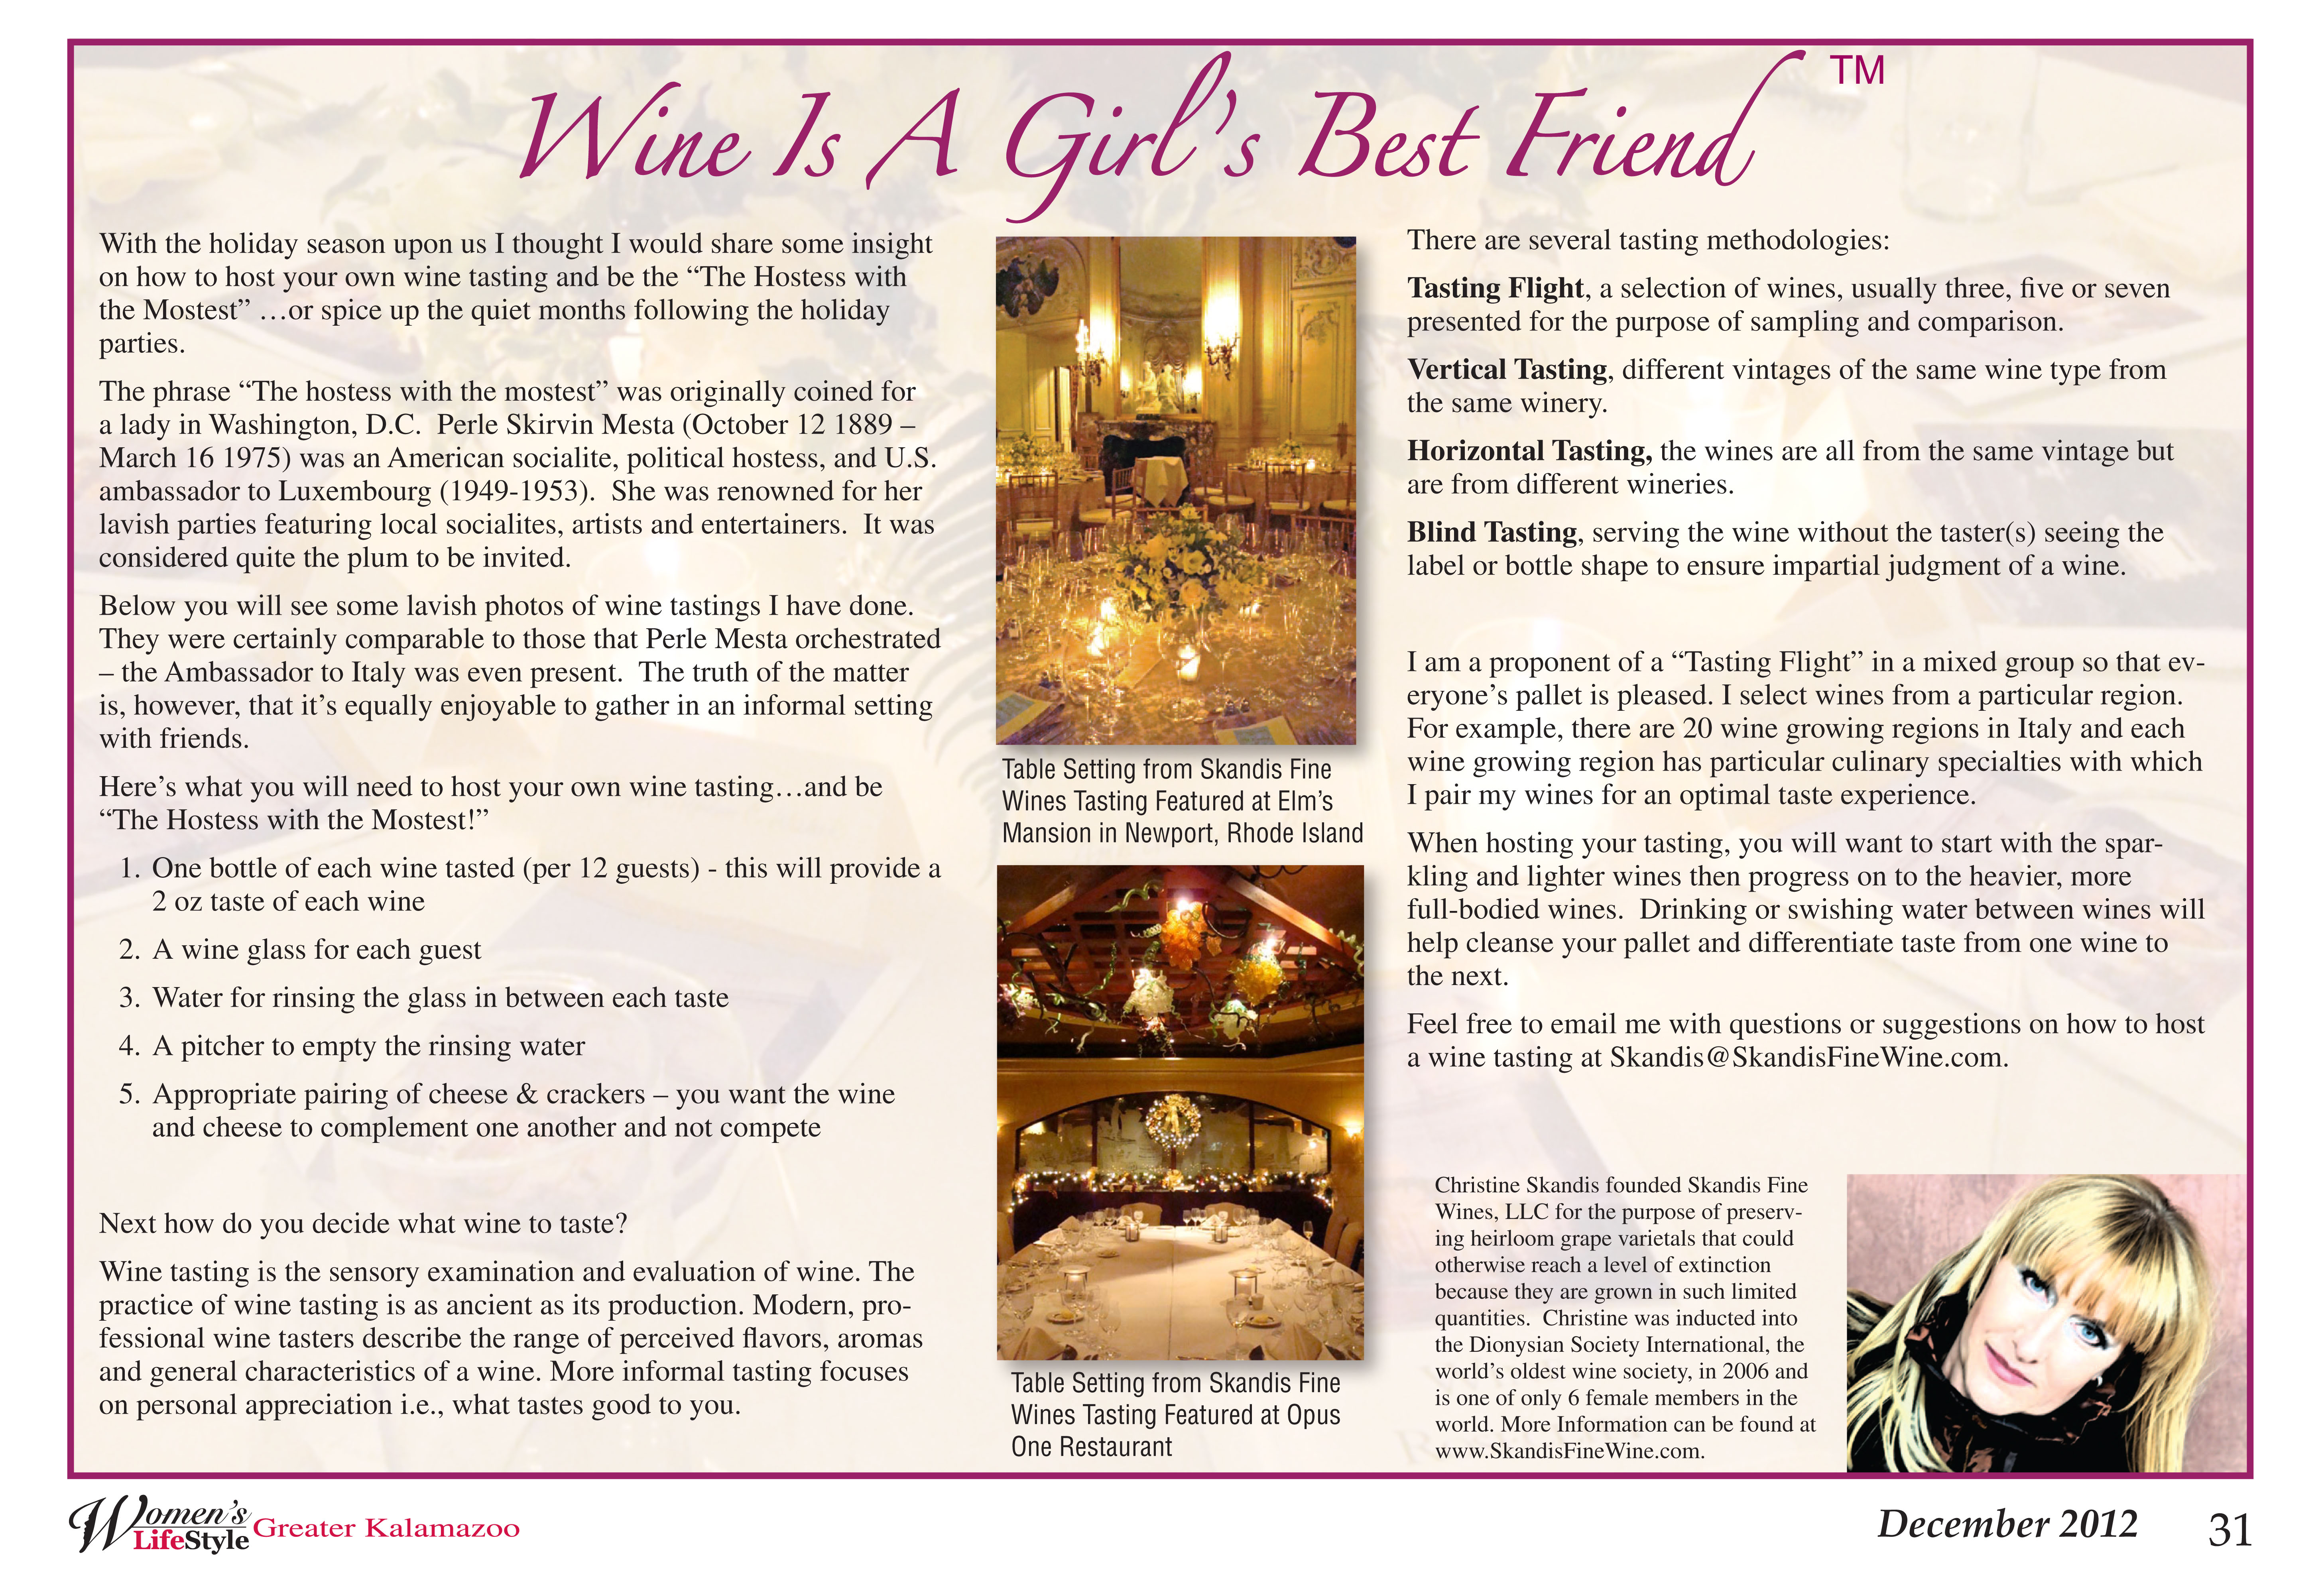 Skandis_Wine Is A Girl's Best Friend_2012 12_Hostess Mostest_from MAGAZINE_TM_smaller 2